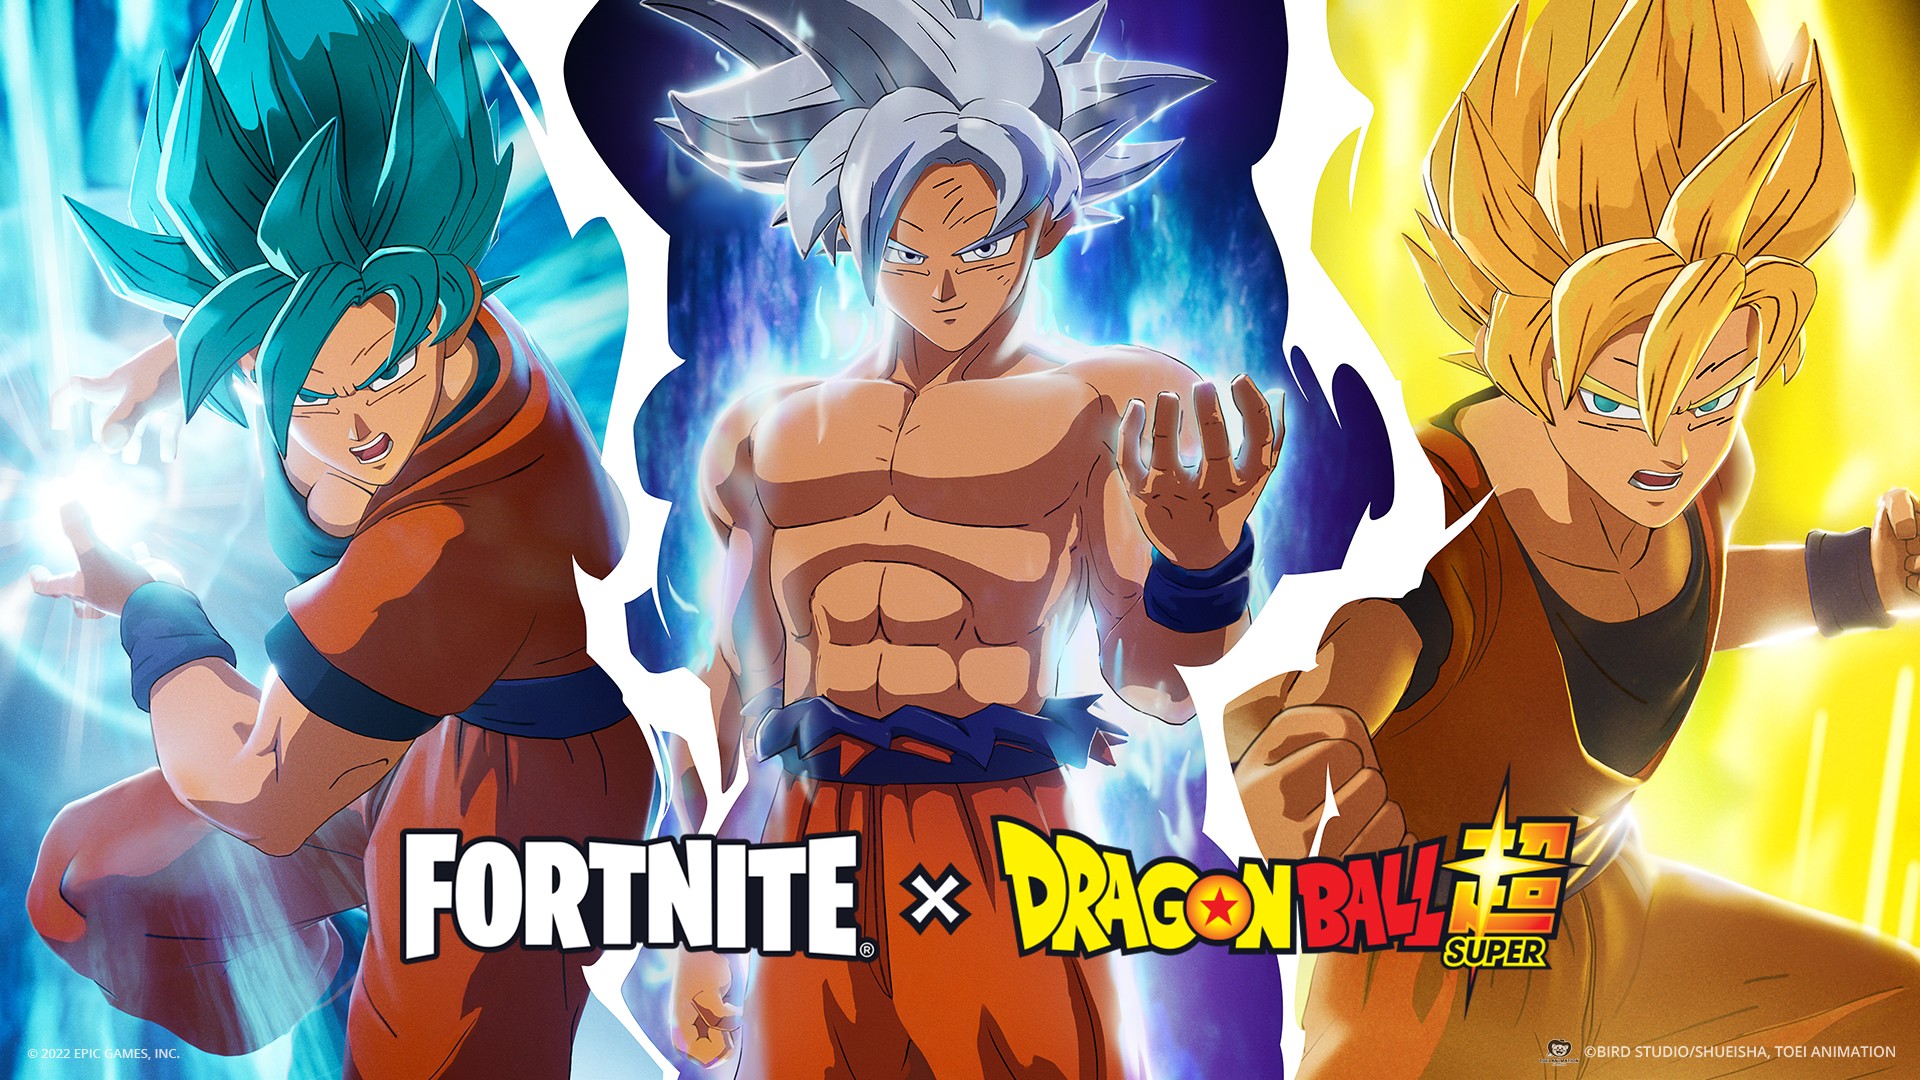 Fortnite x Dragon Ball Is Now Live, Featuring Kamehameha Item, Dragon Ball Super Episodes, and More